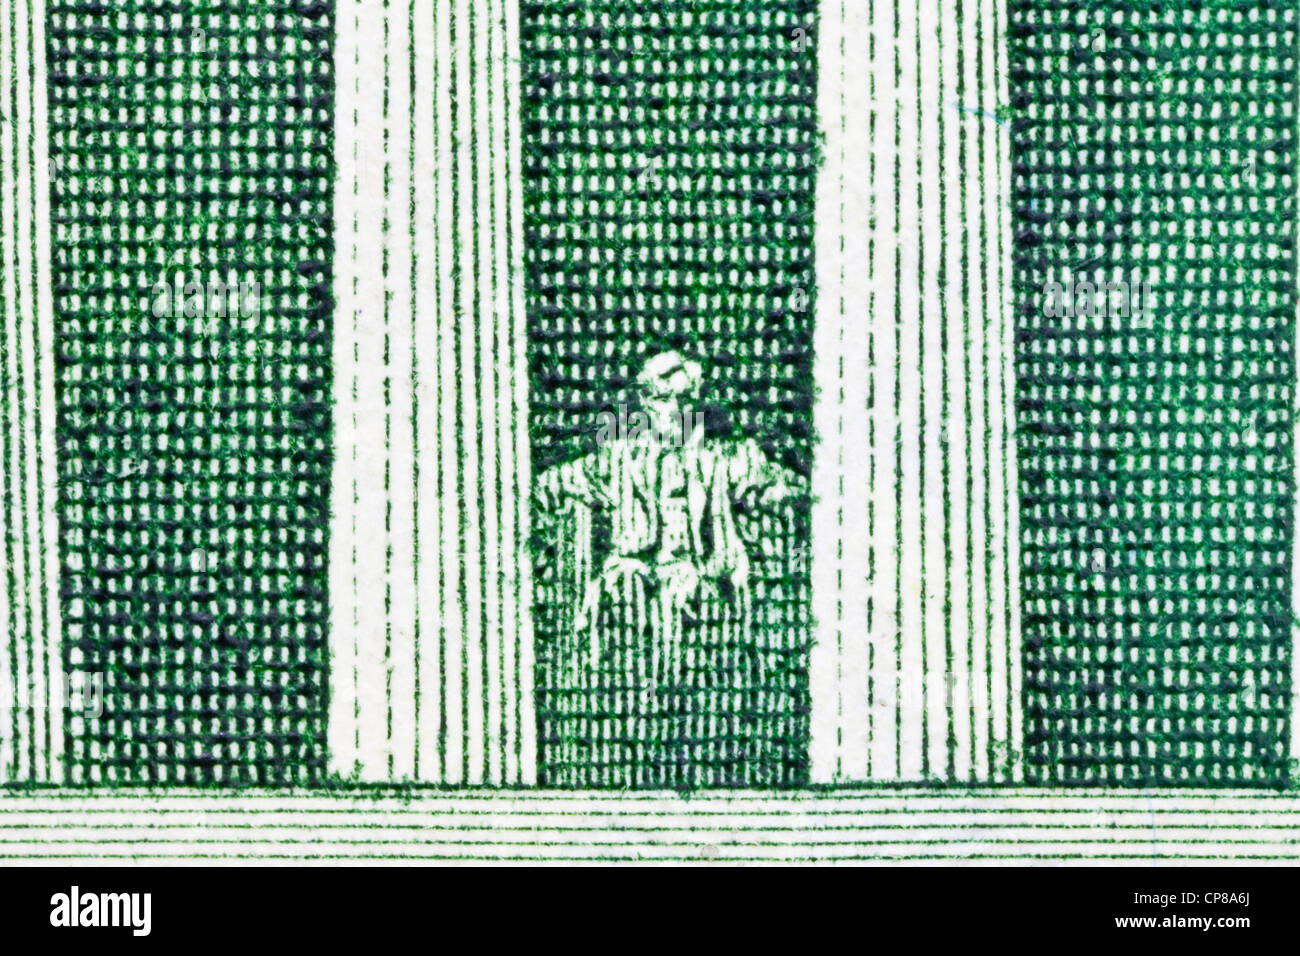 Extreme Macro of the Lincoln Memorial on the US Five Dollar Bill. Stock Photo